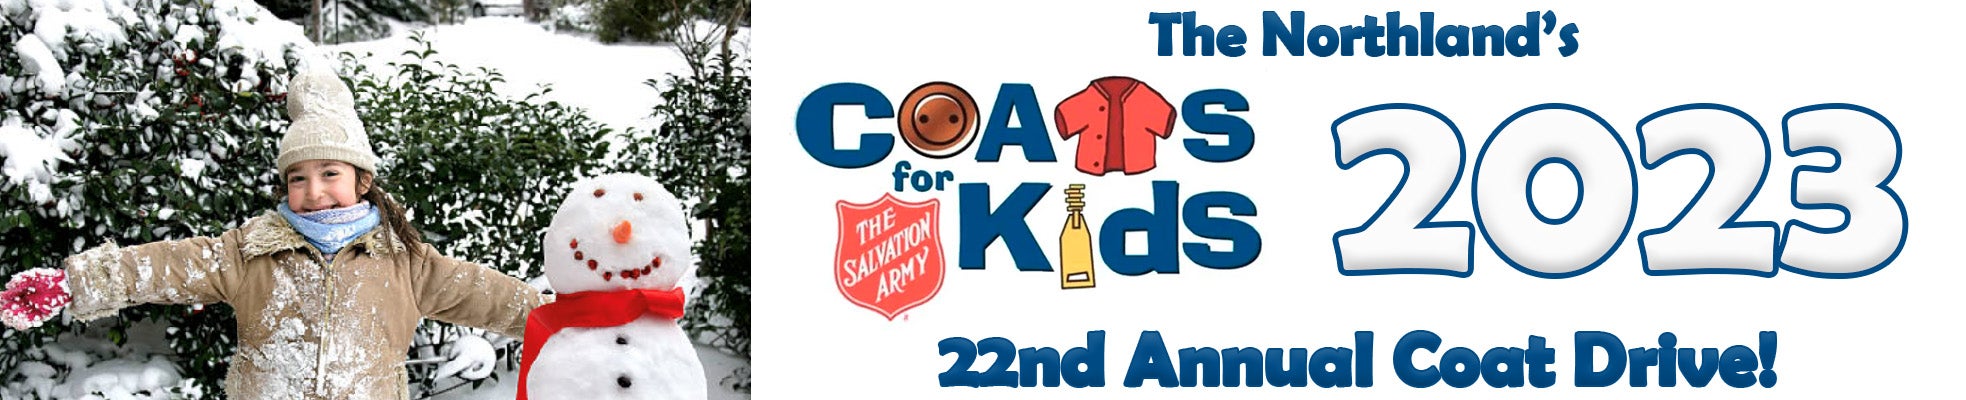 The Northland's 21st Annual Coats For Kids Coat Drive 2022